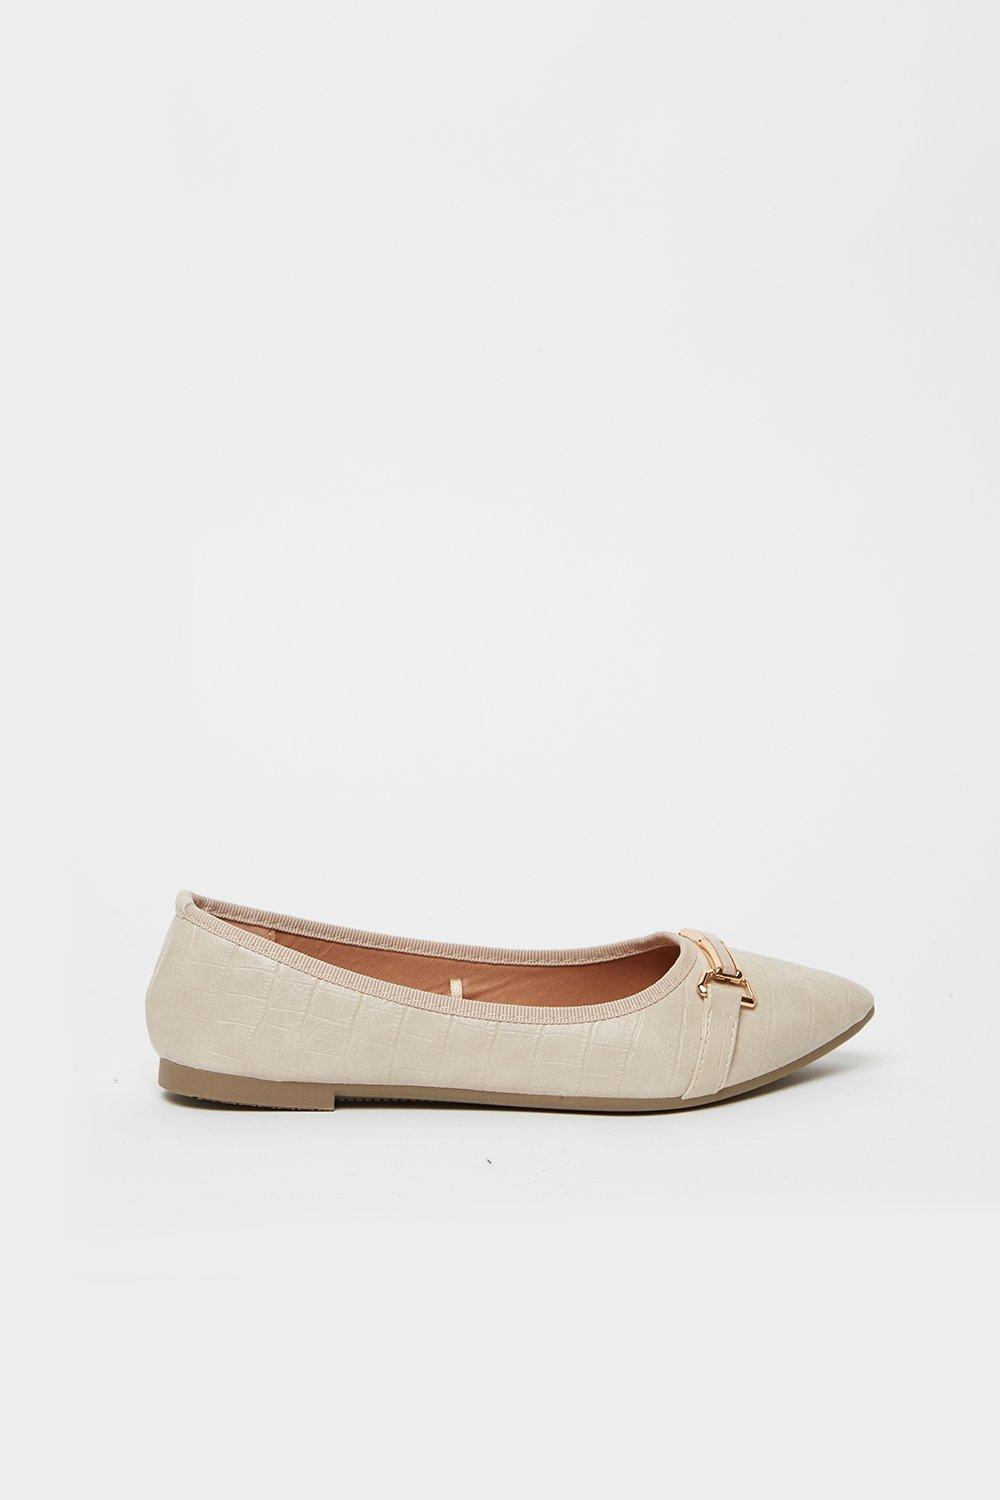 Refresh Your Wardrobe Staples With These Chic Flats. A Textured Finish, Metallic Feature Trim And Pointed Toe Keep These On-Trend, Whilst An Easy Slip On Design And Flat Heel Will Have You Wearing These On-Repeat.  Heel Height: 10Mm Standard Fit Flat Shoe